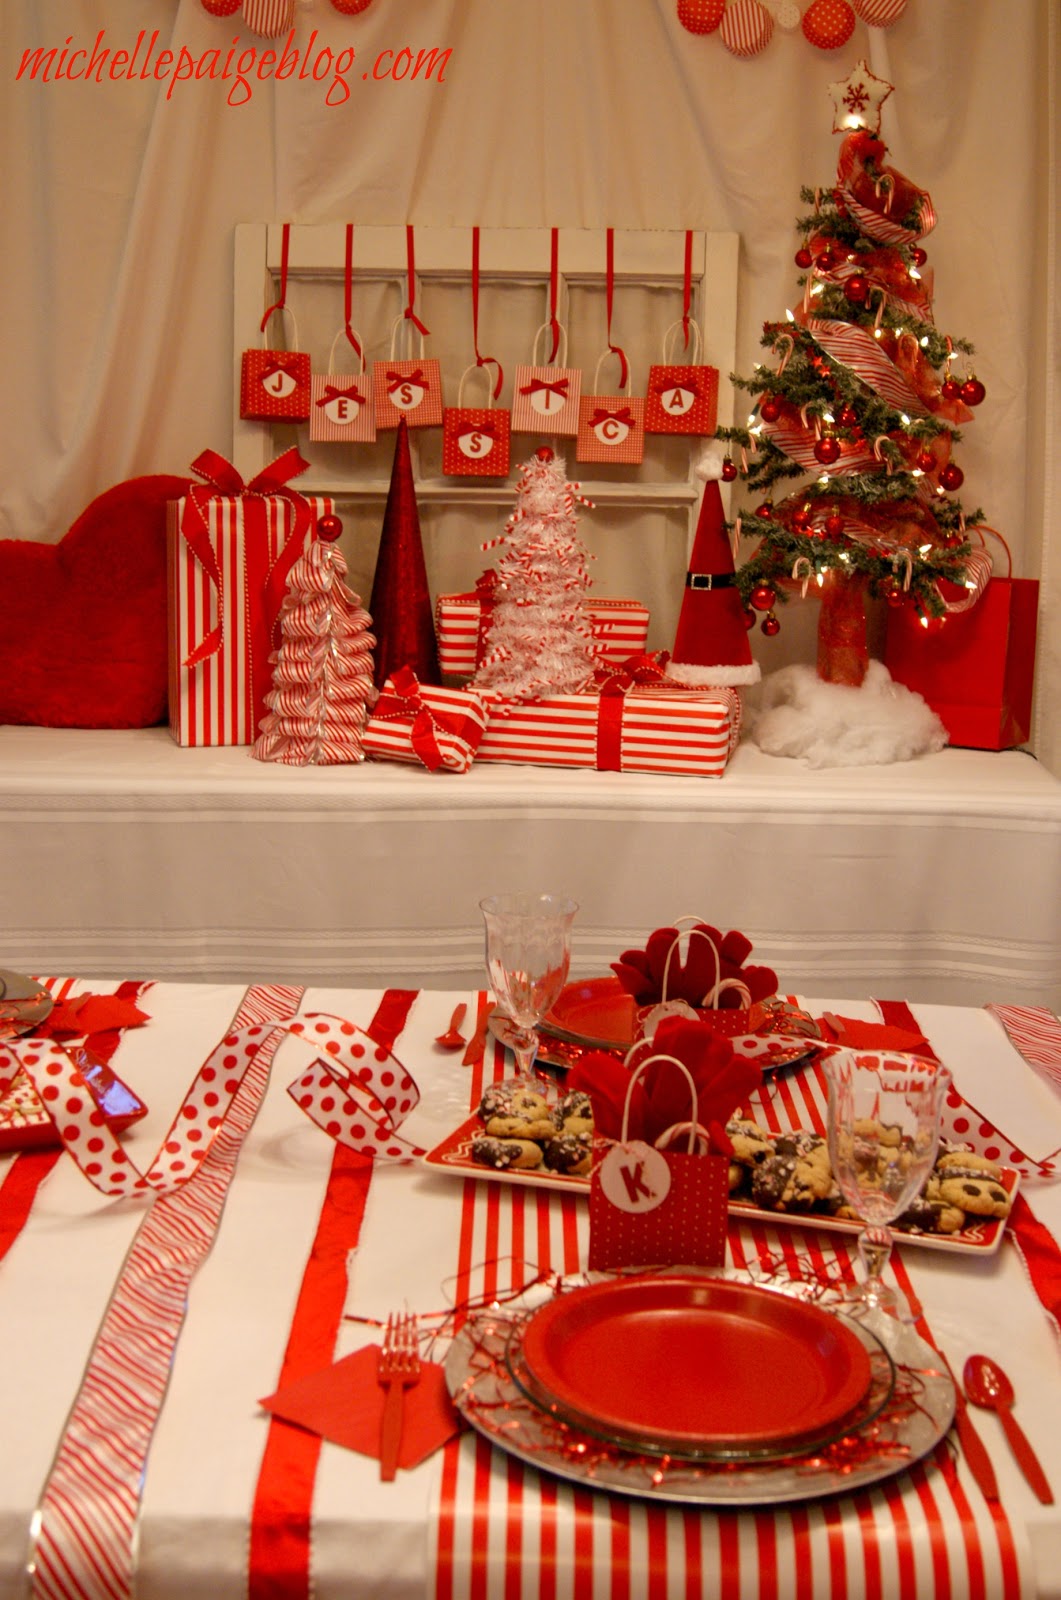 michelle paige blogs Red  and White  Candy Cane Party  